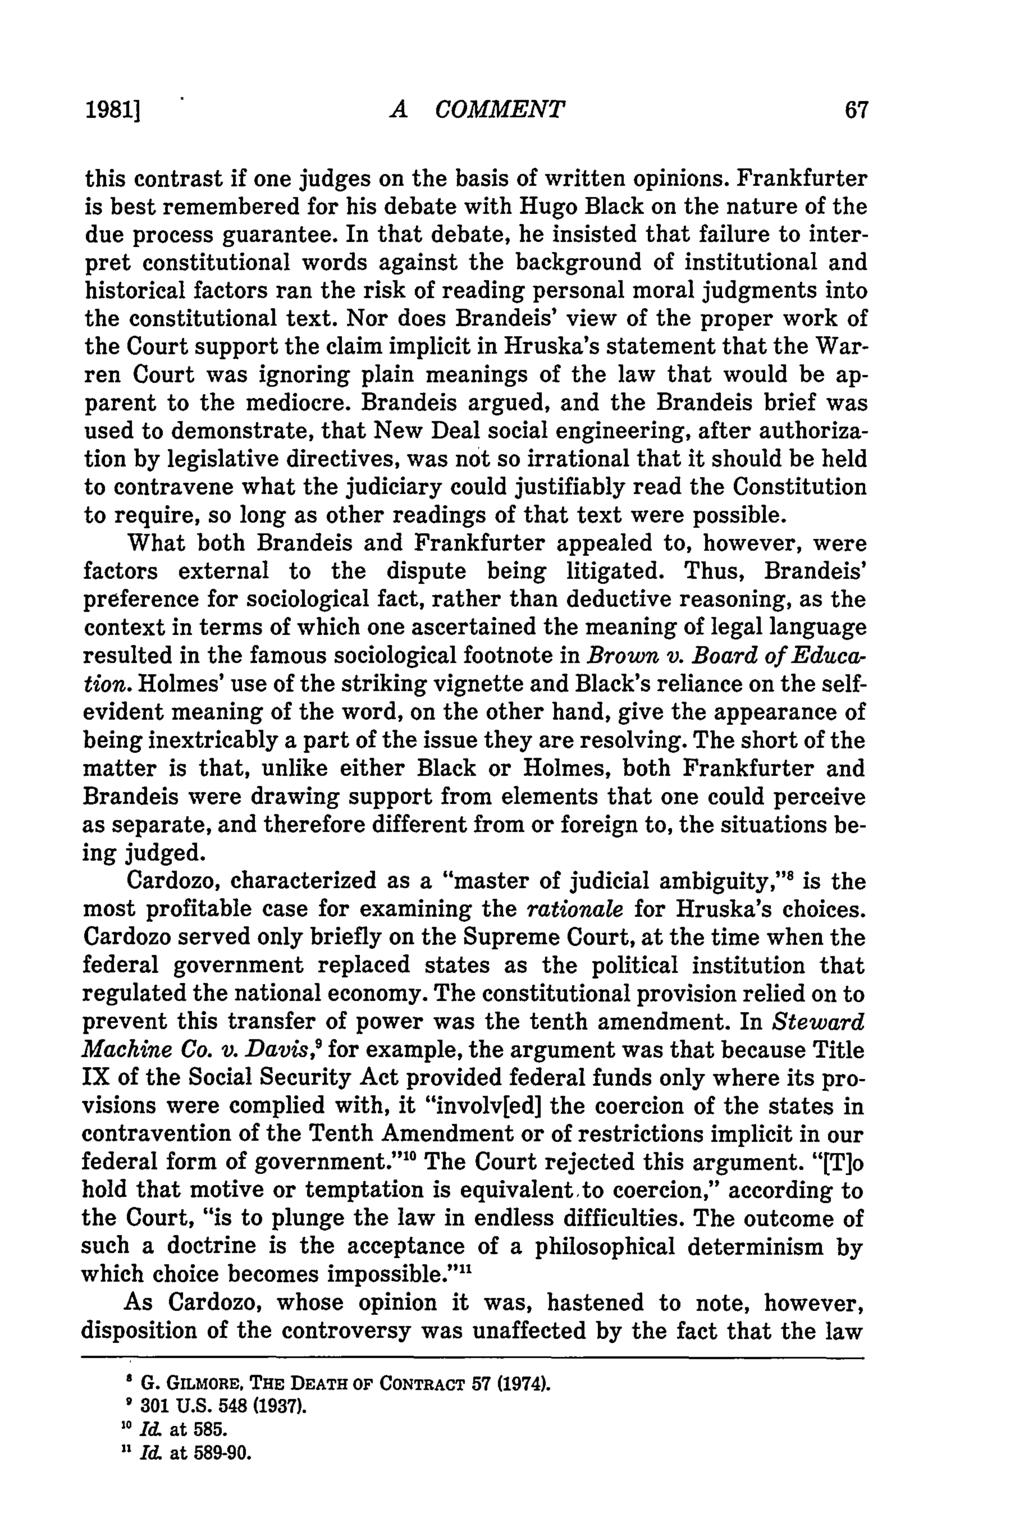 1981] A COMMENT this contrast if one judges on the basis of written opinions. Frankfurter is best remembered for his debate with Hugo Black on the nature of the due process guarantee.